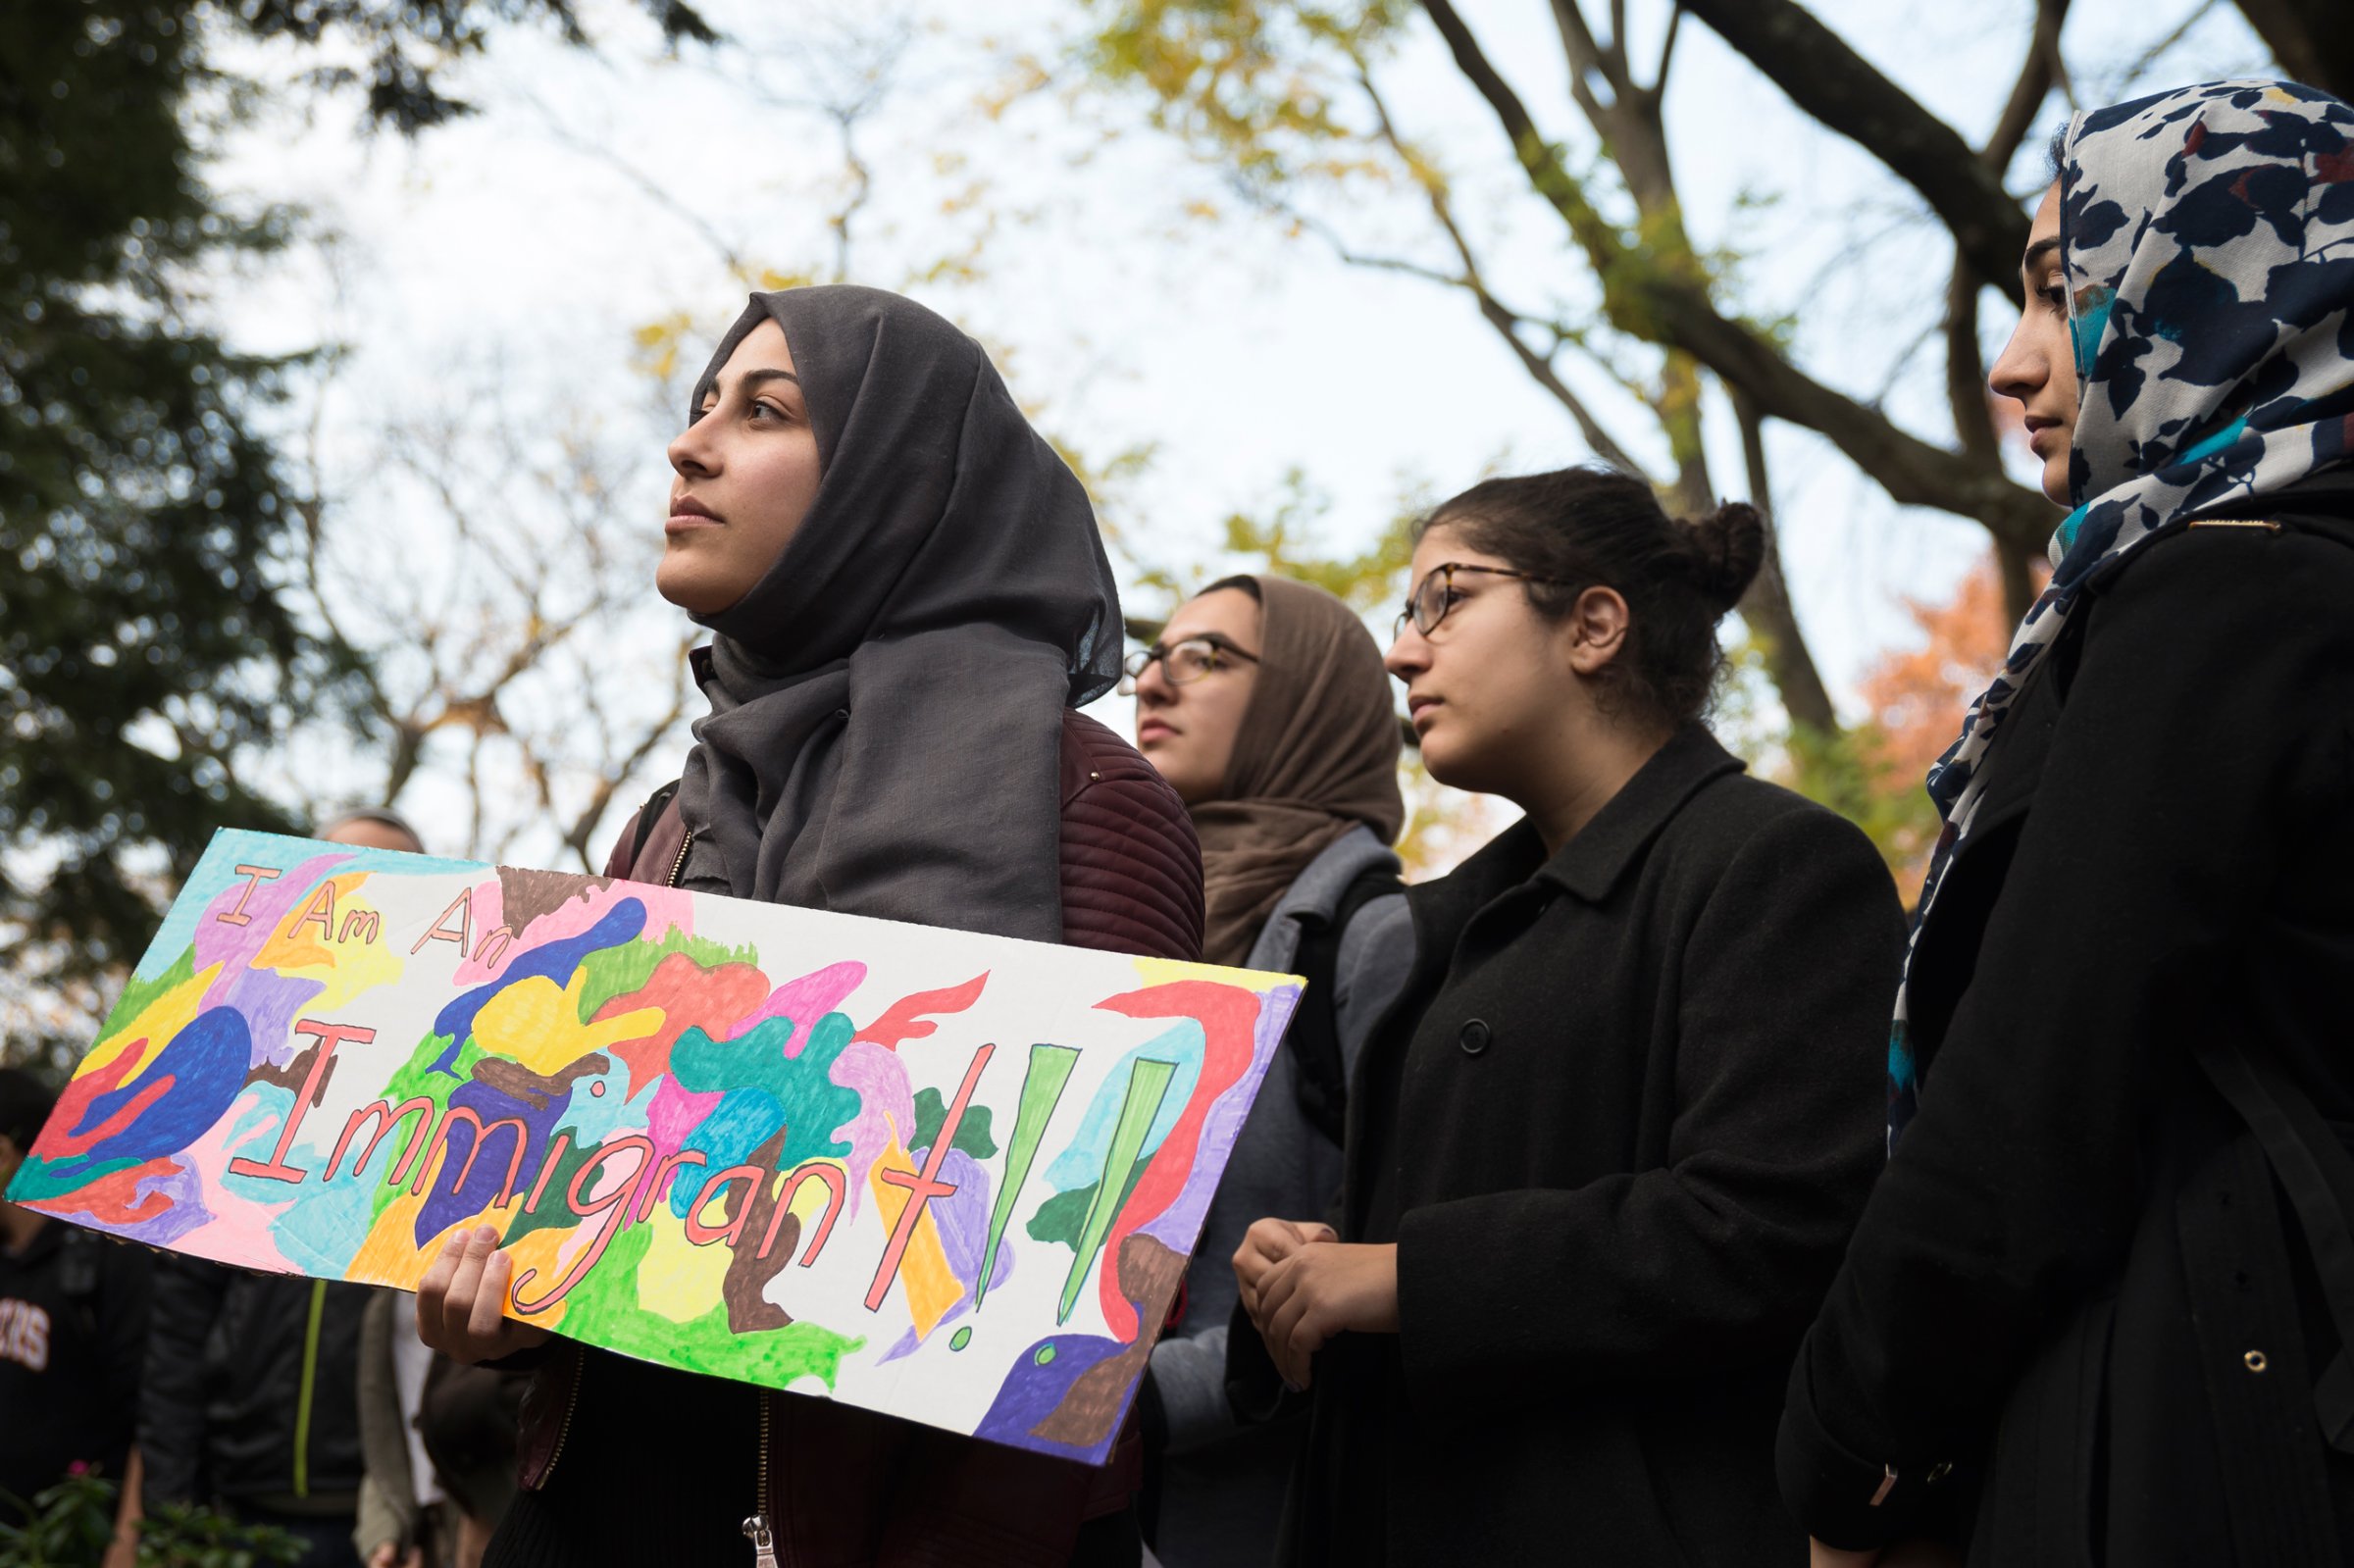 As part of a nationwide series of university student walkouts in protest of Republican President-elect Donald J. Trump's proposed policy initiatives regarding immigration and the deportation of criminal undocumented immigrants, nearly a thousand students and faculty members at Rutgers University staged a rally and march in downtown New Brunswick, NJ on November 16, 2016. (Photo by Albin Lohr-Jones) *** Please Use Credit from Credit Field ***